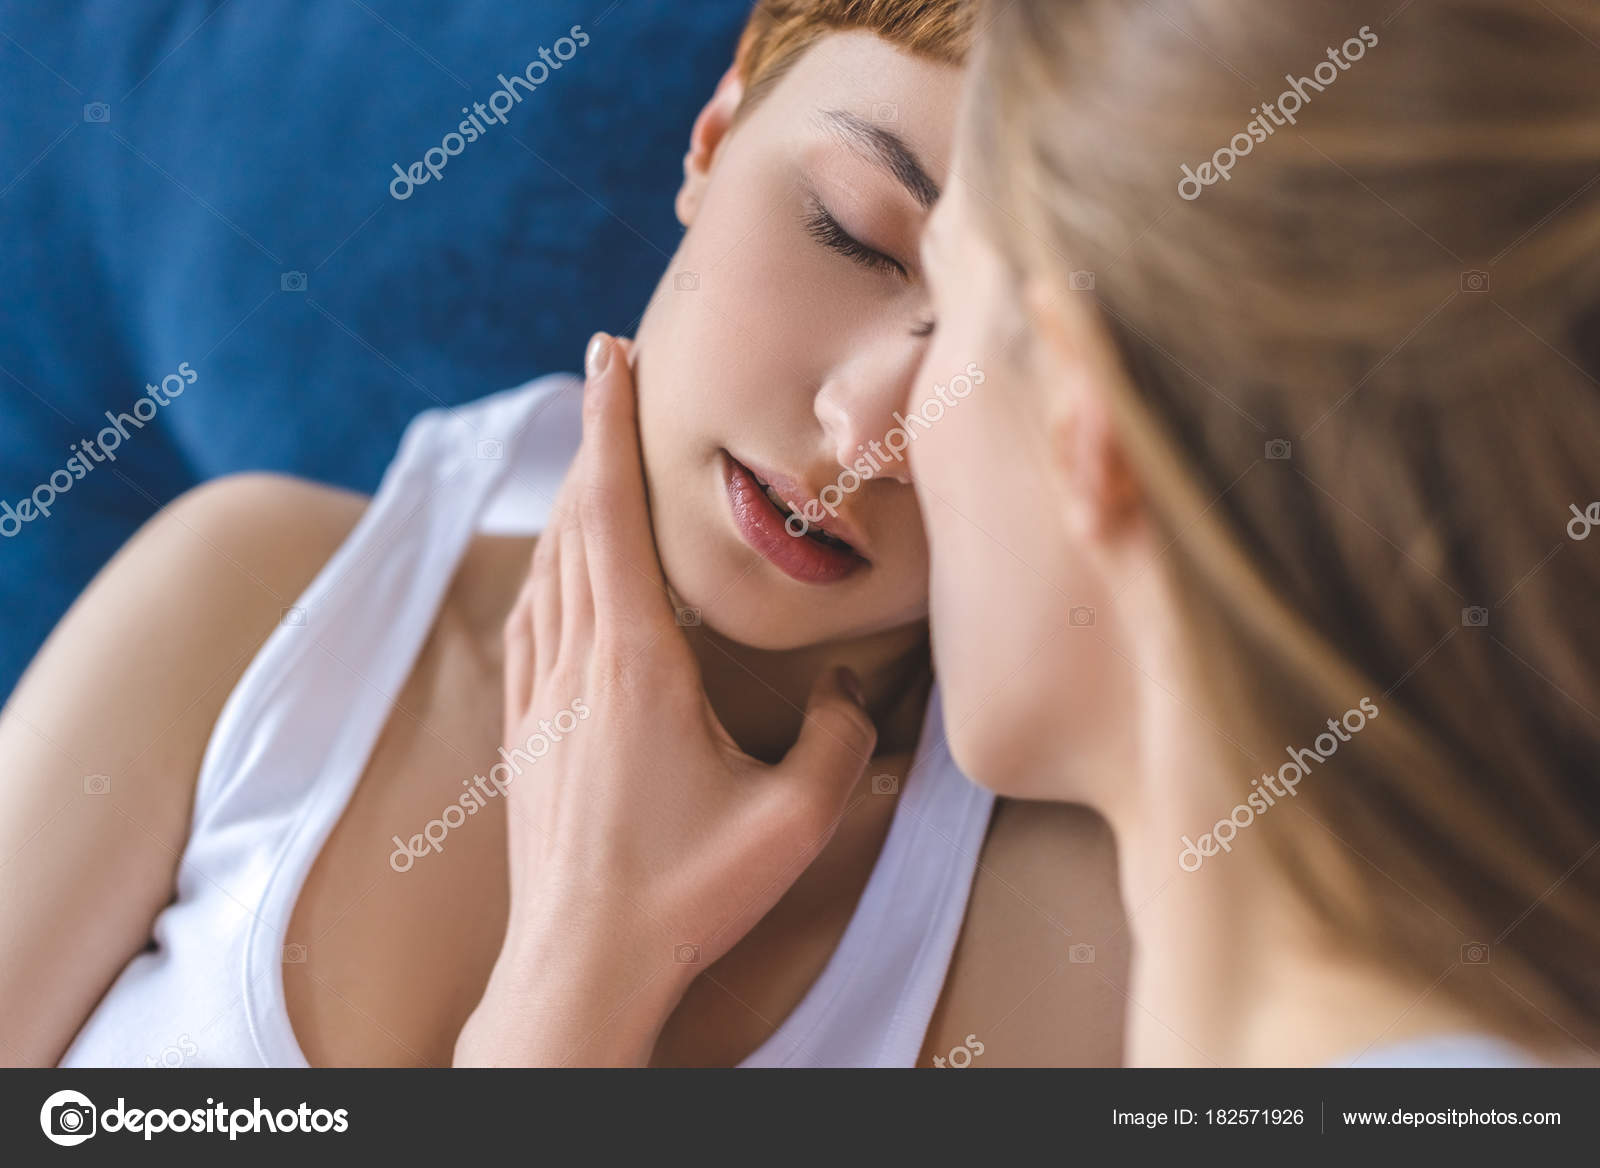 Lesbians Kissing On Couch